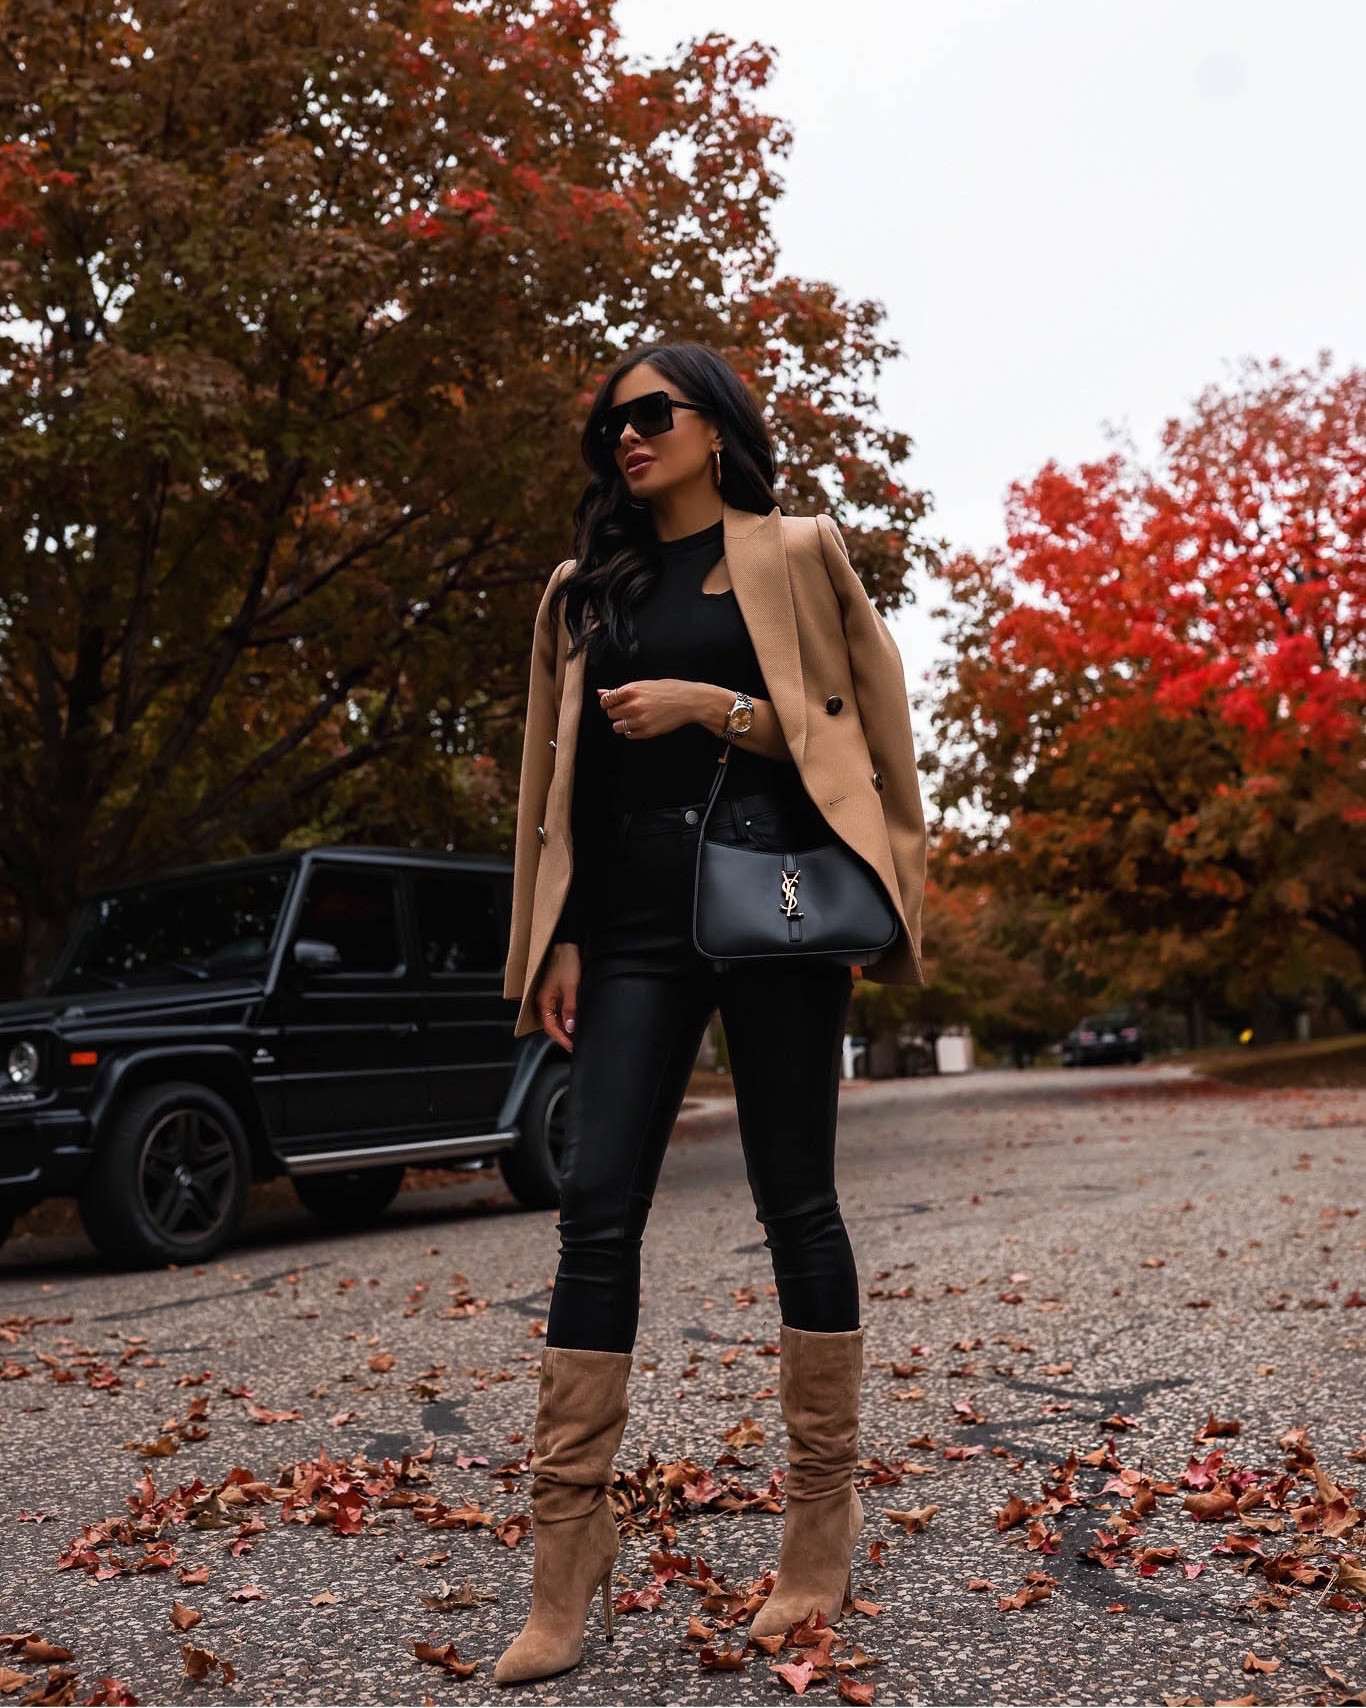 Combat Boots Outfit For Fall - Mia Mia Mine  Combat boot outfit, Fall boots  outfit, Louis vuitton boots